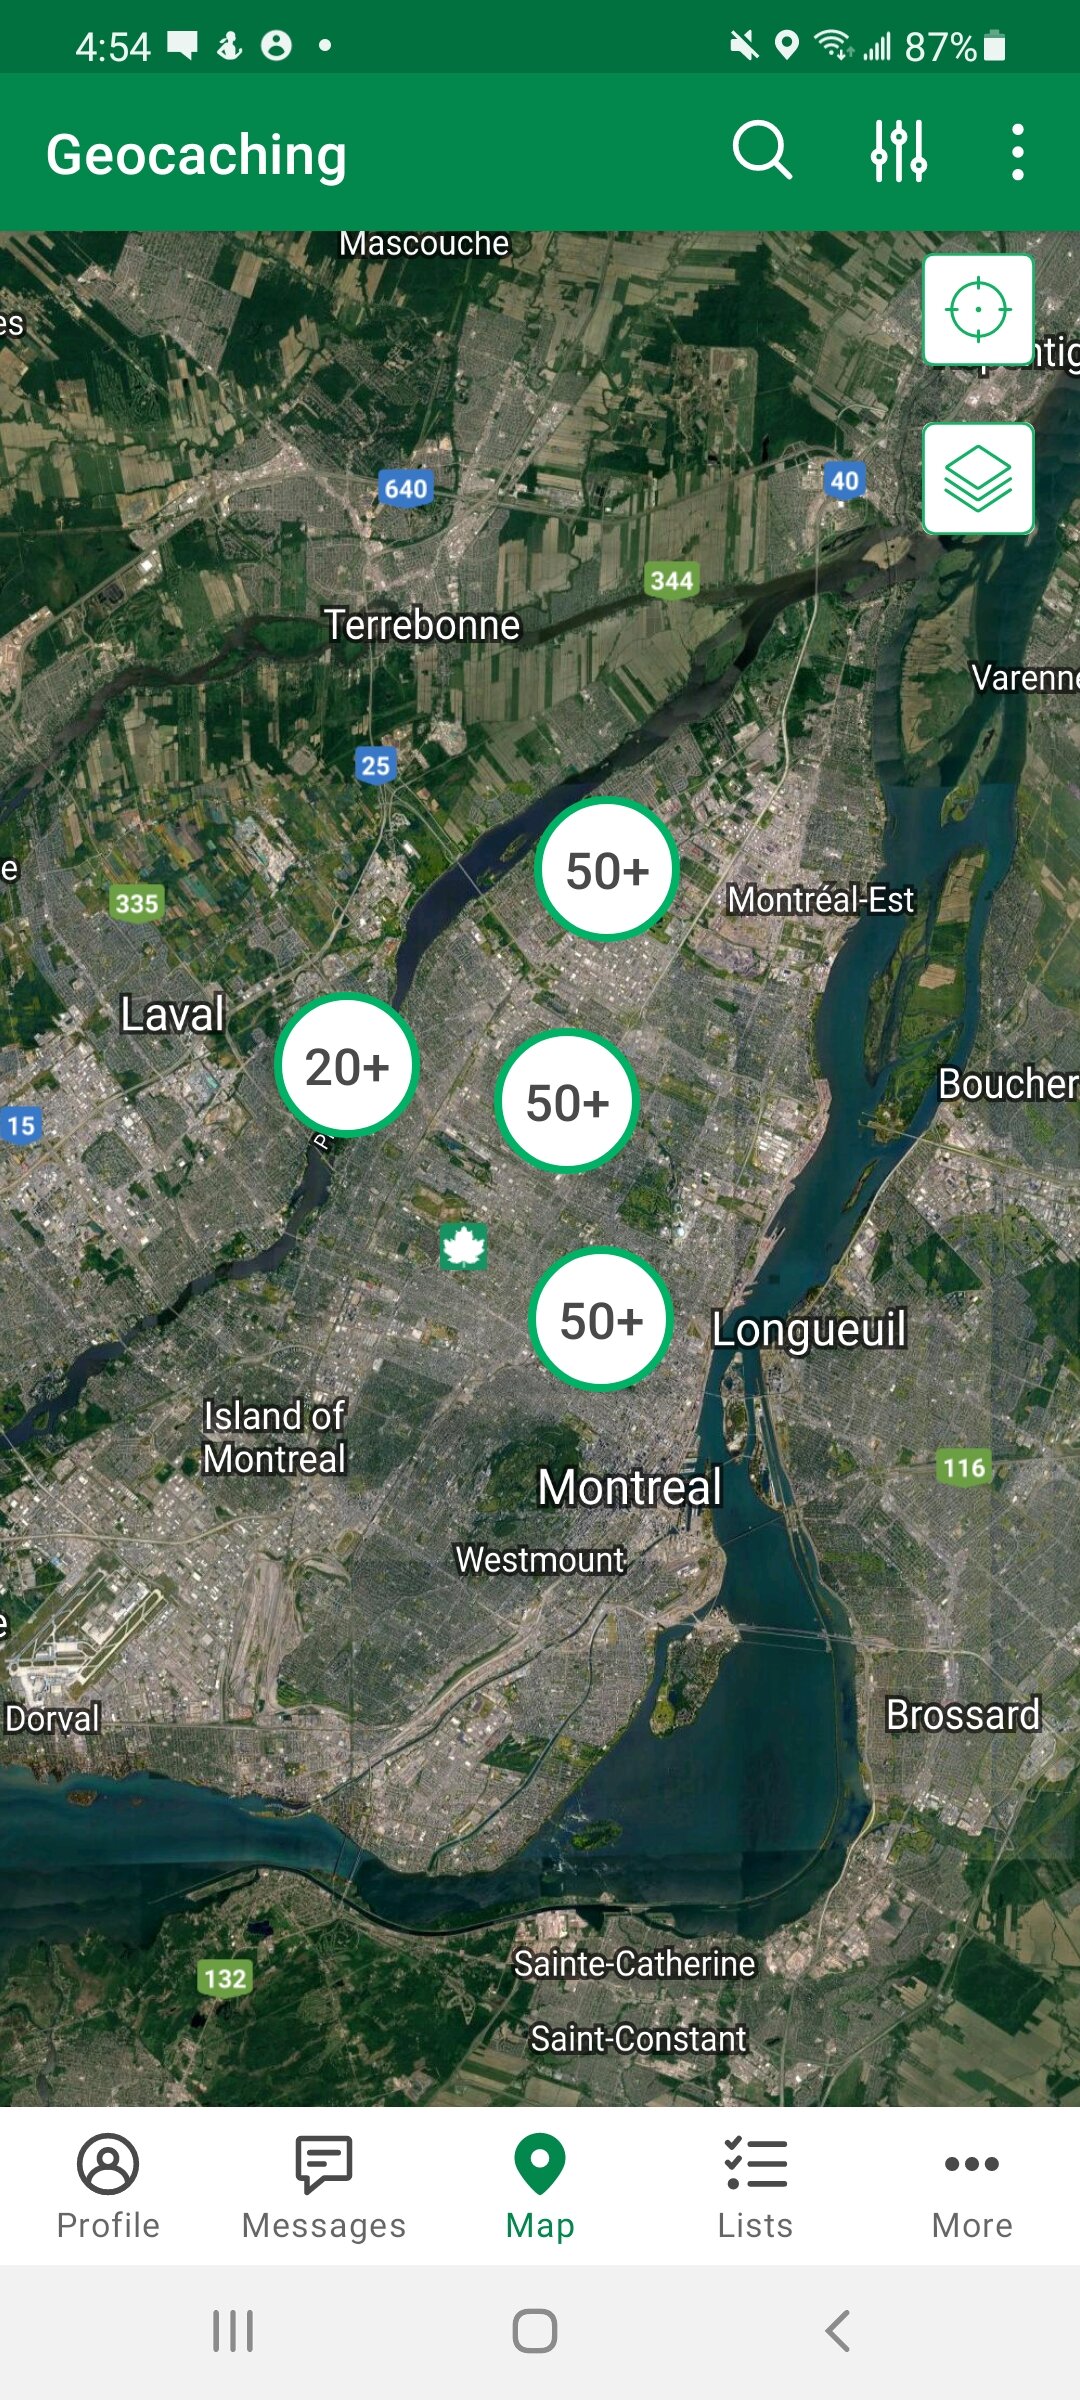 Alex-MJ-On-the-GO-Blogue_geocaching app_toutes-les-caches-montreal.jpg